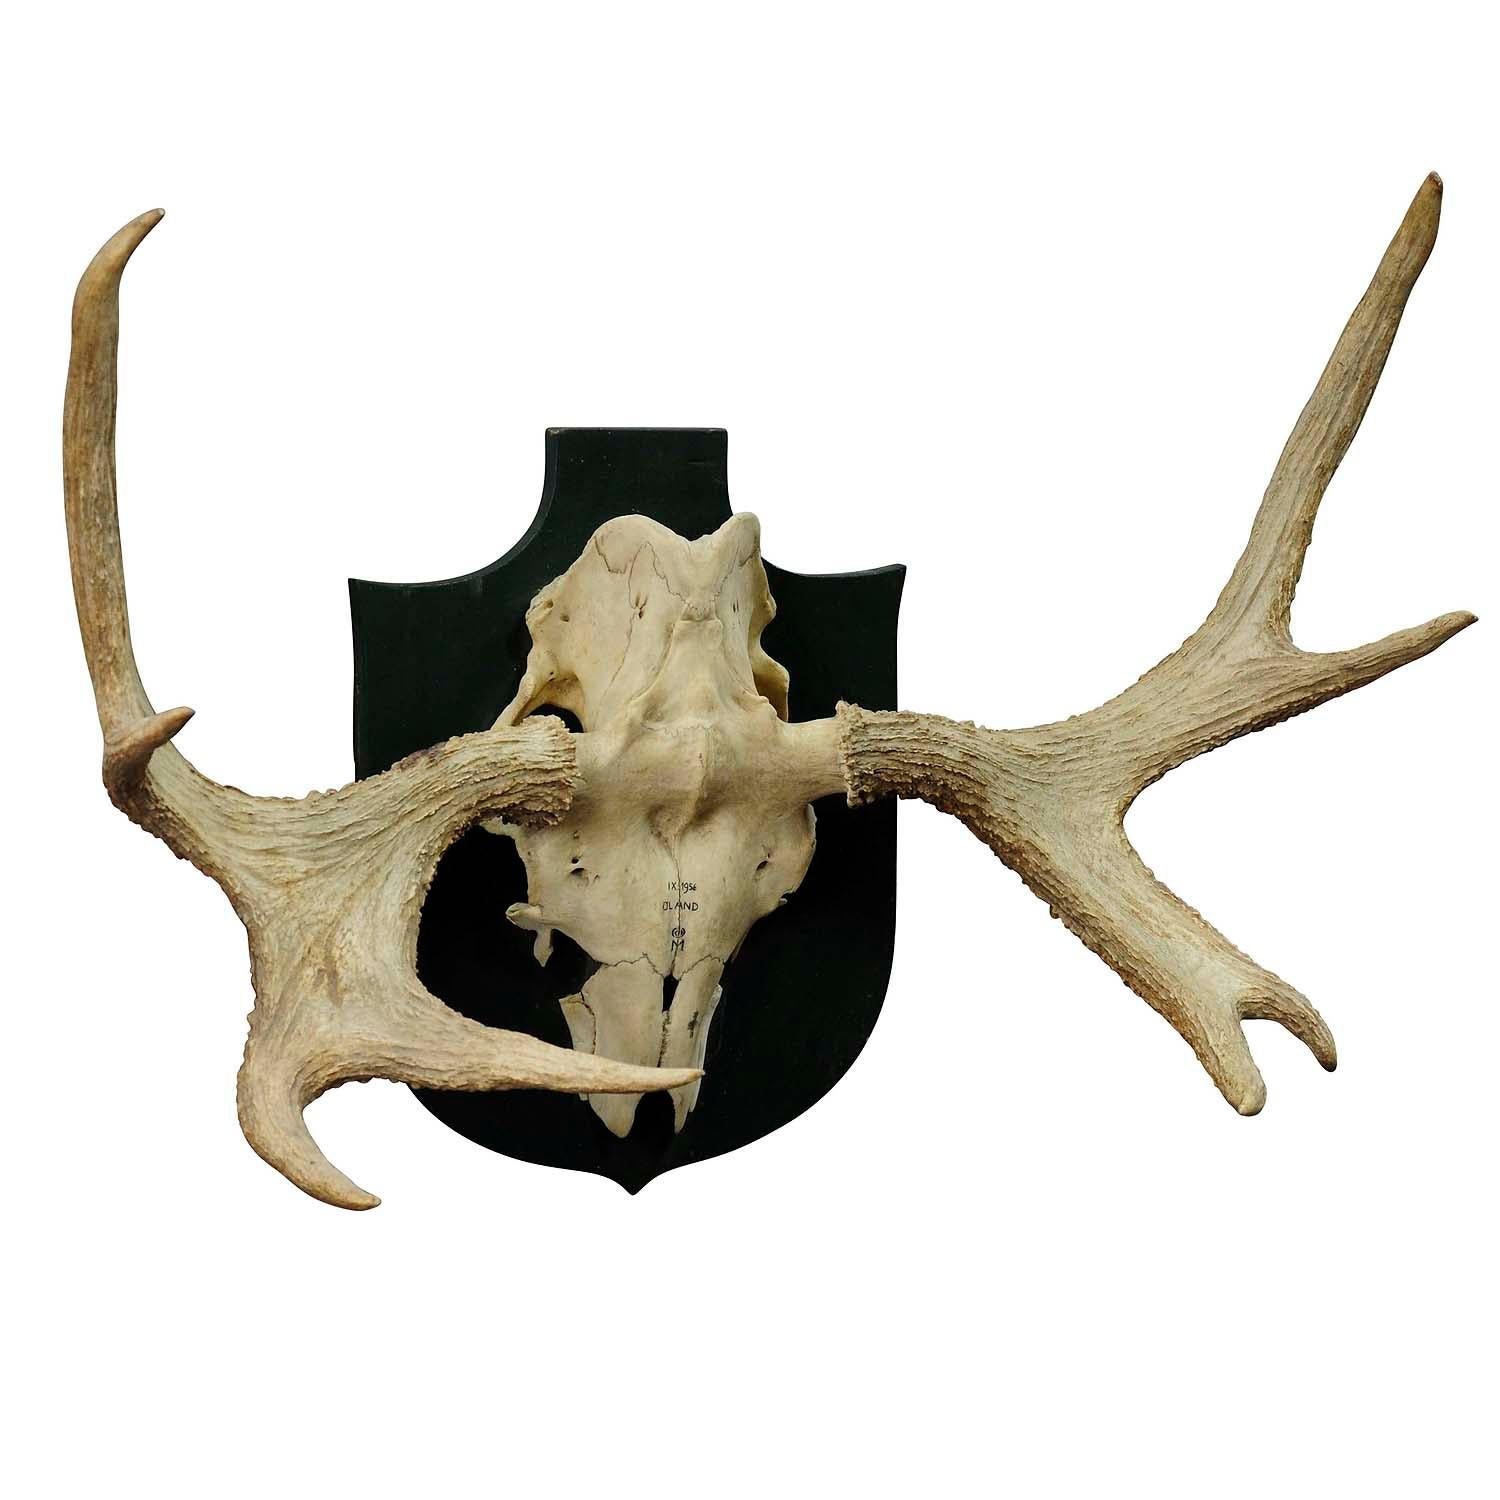 Moose Trophy from a Noble Estate in Germany Shot in Oeland 1956

An impressive moose (Alces alces) trophy from a noble estate, shot in Oeland 1956 by a member of the lordly family of Baden. Mounted on wooden plaque. Place and year of the hunt and